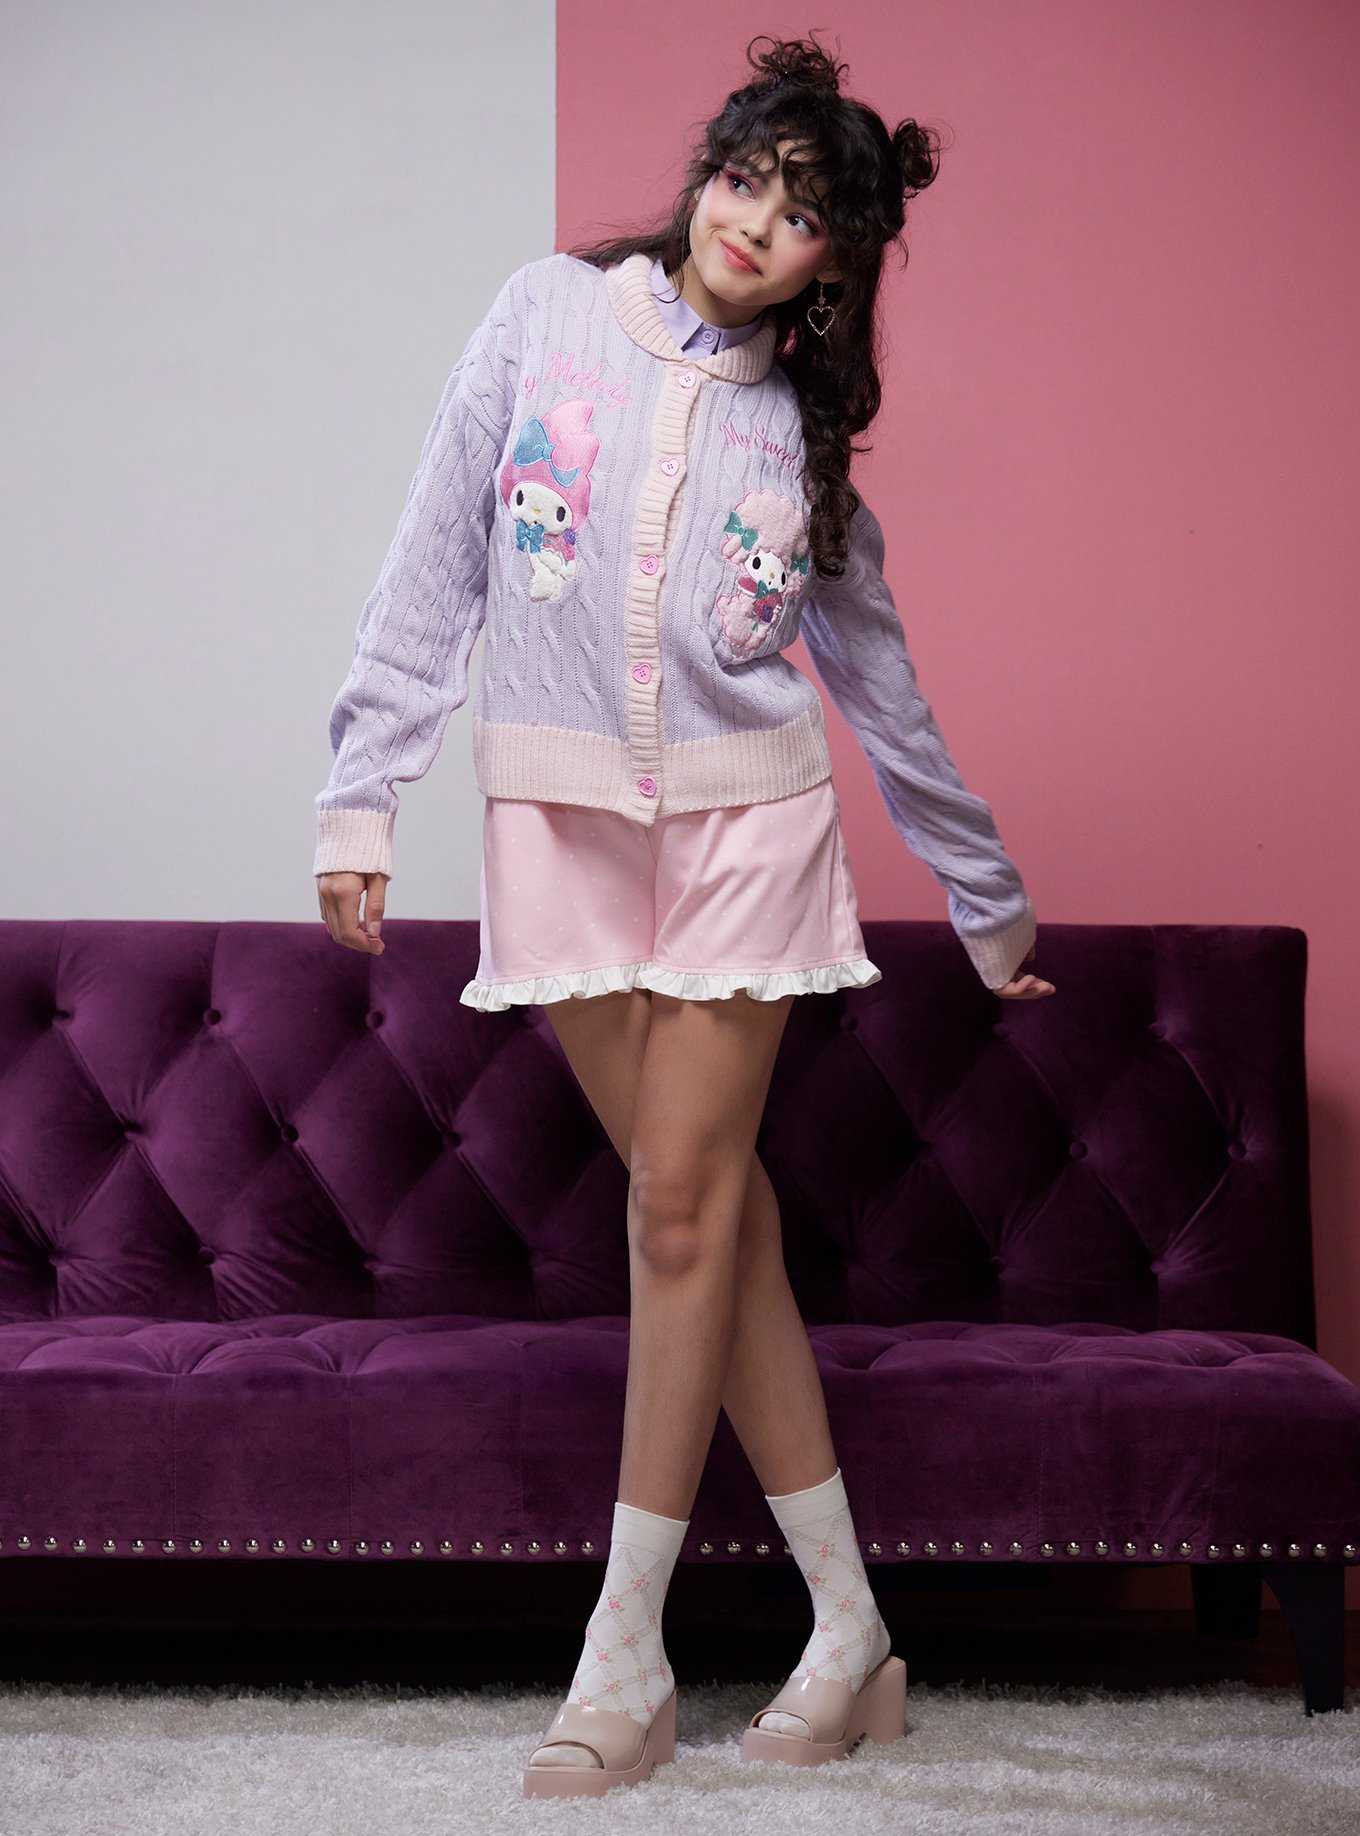 My Melody & My Sweet Piano Cable Knit Girls Cardigan, , hi-res